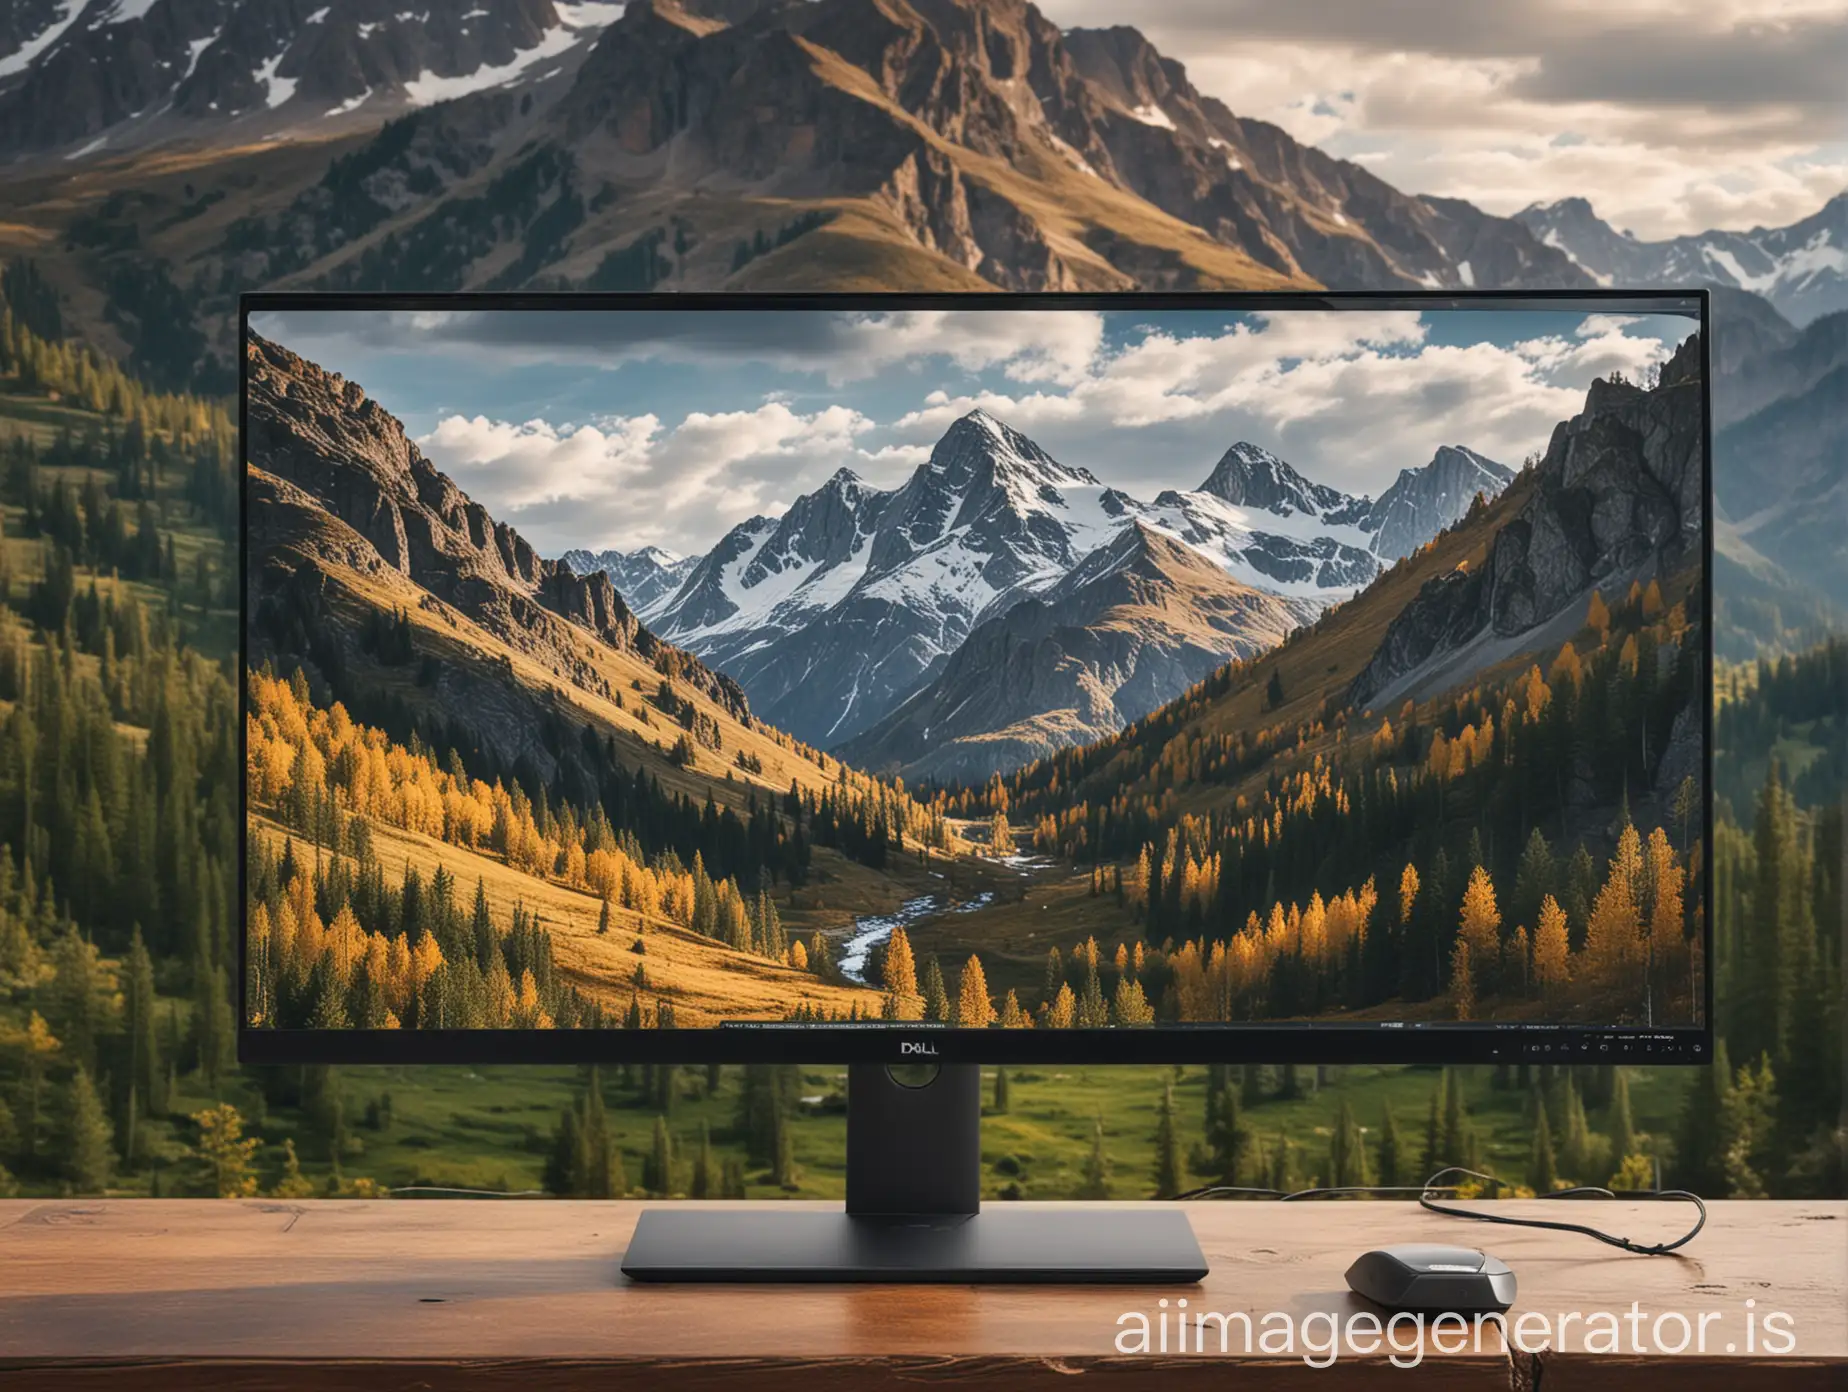 Dell-Monitor-with-Mountain-Landscape-Background